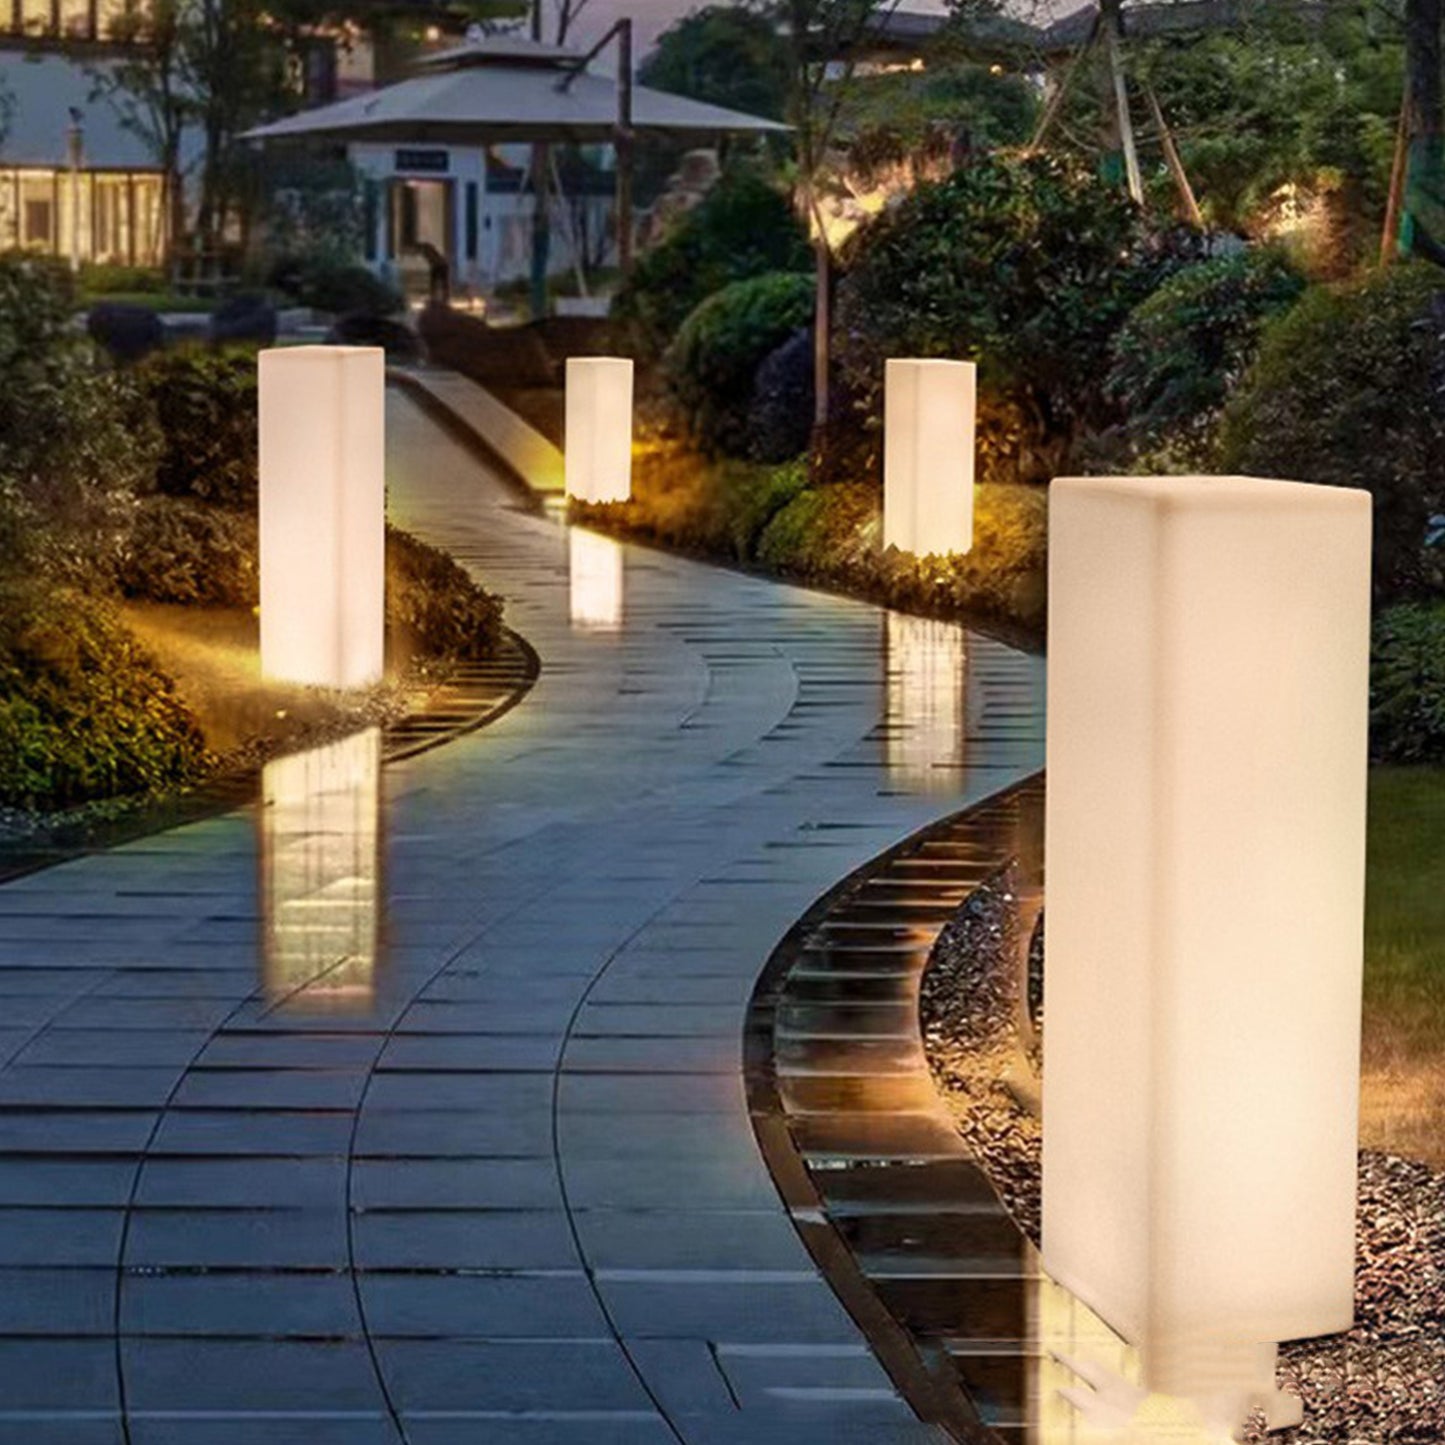 Waterproof Outdoor RGB Floor Lamp Dimmable with Remote Control, USB Chargeable LED Garden Lights Colour Changing Mood Light Rectangular Shape - Buy Waterproof Outdoor RGB Floor Lamp Dimmable with Remote Control, USB Chargeable LED Garden Lights Colour Cha